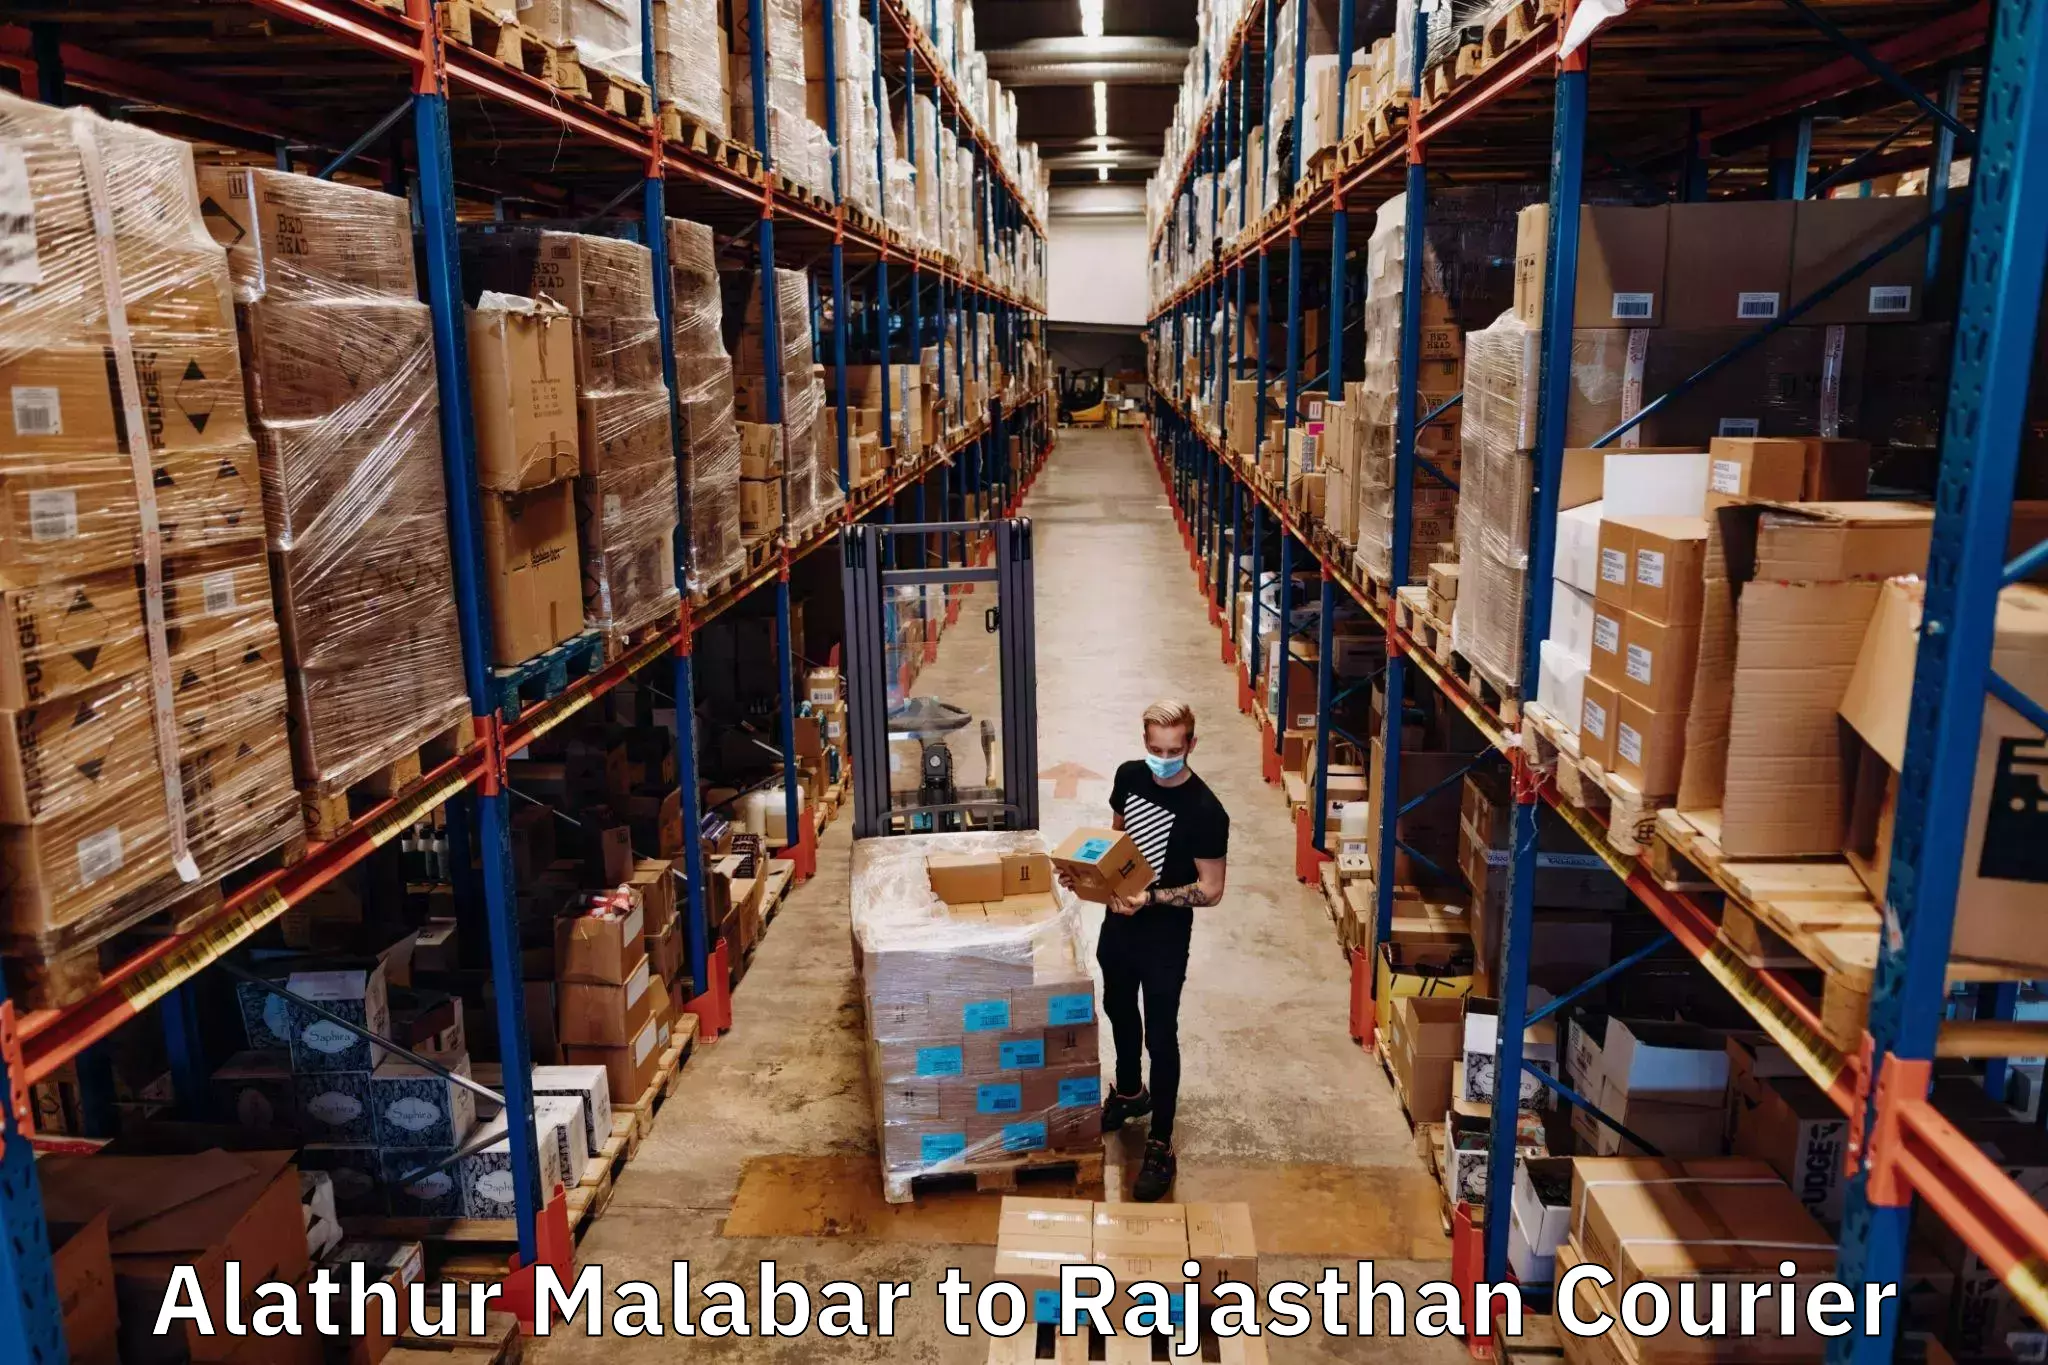 Professional courier services Alathur Malabar to Rajasthan